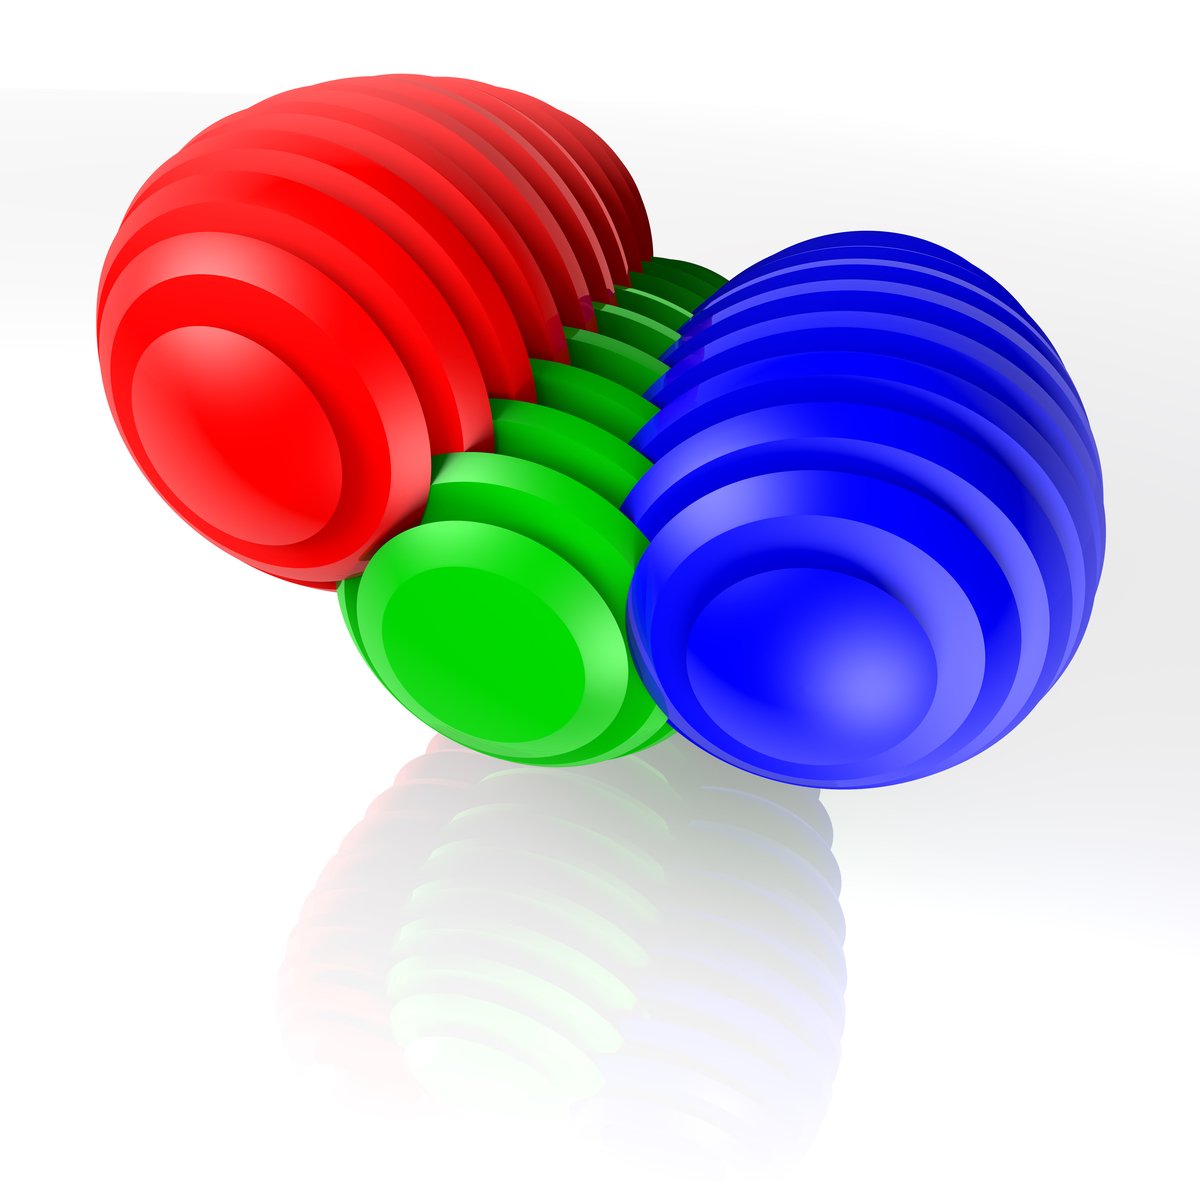 three colorful balls sitting side by side on a white background